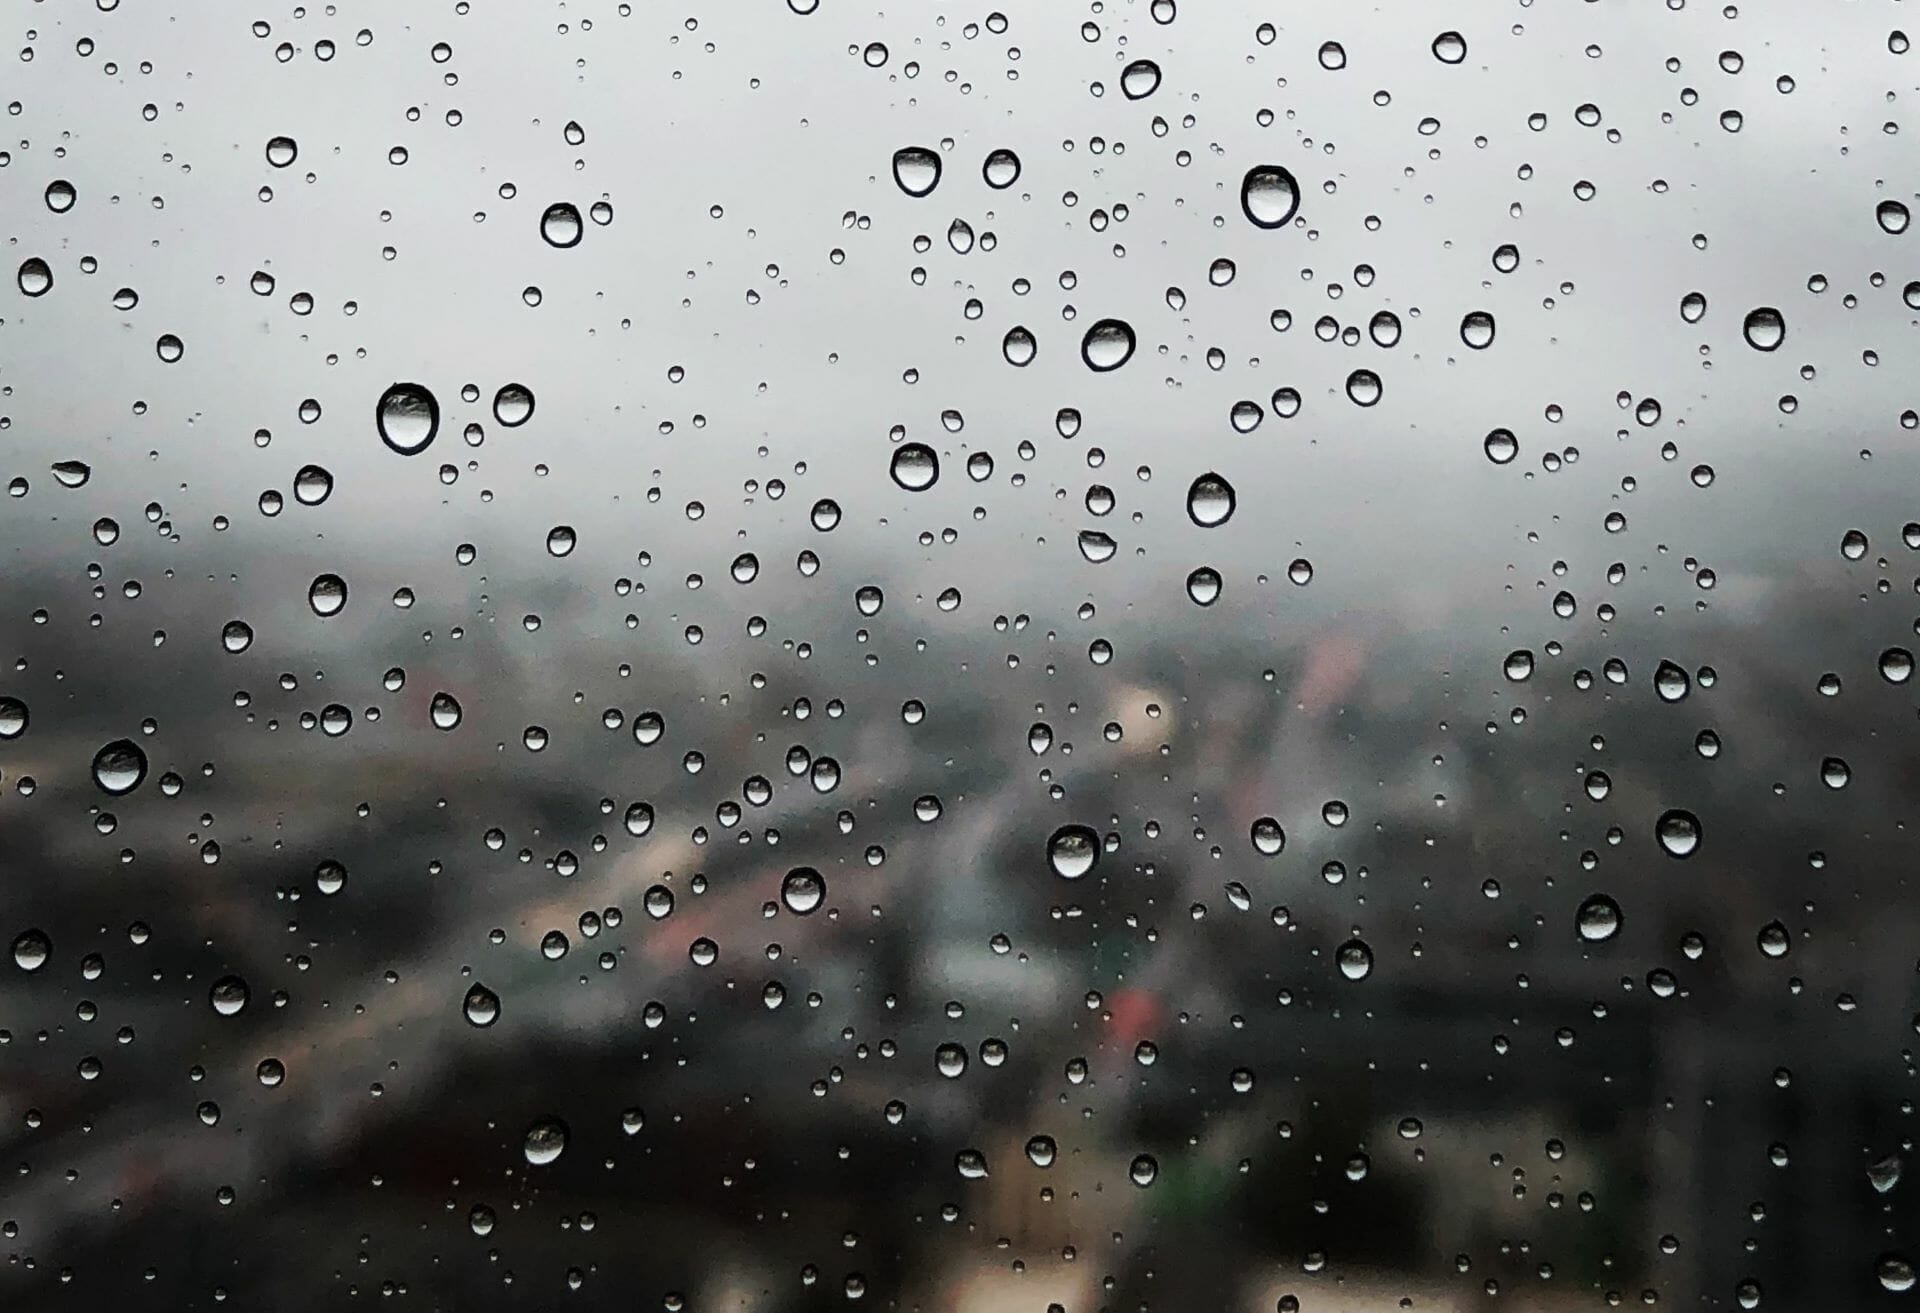 Rain drops from stormwater on a window overlooking the D.C., VA, and MD area during spring time.